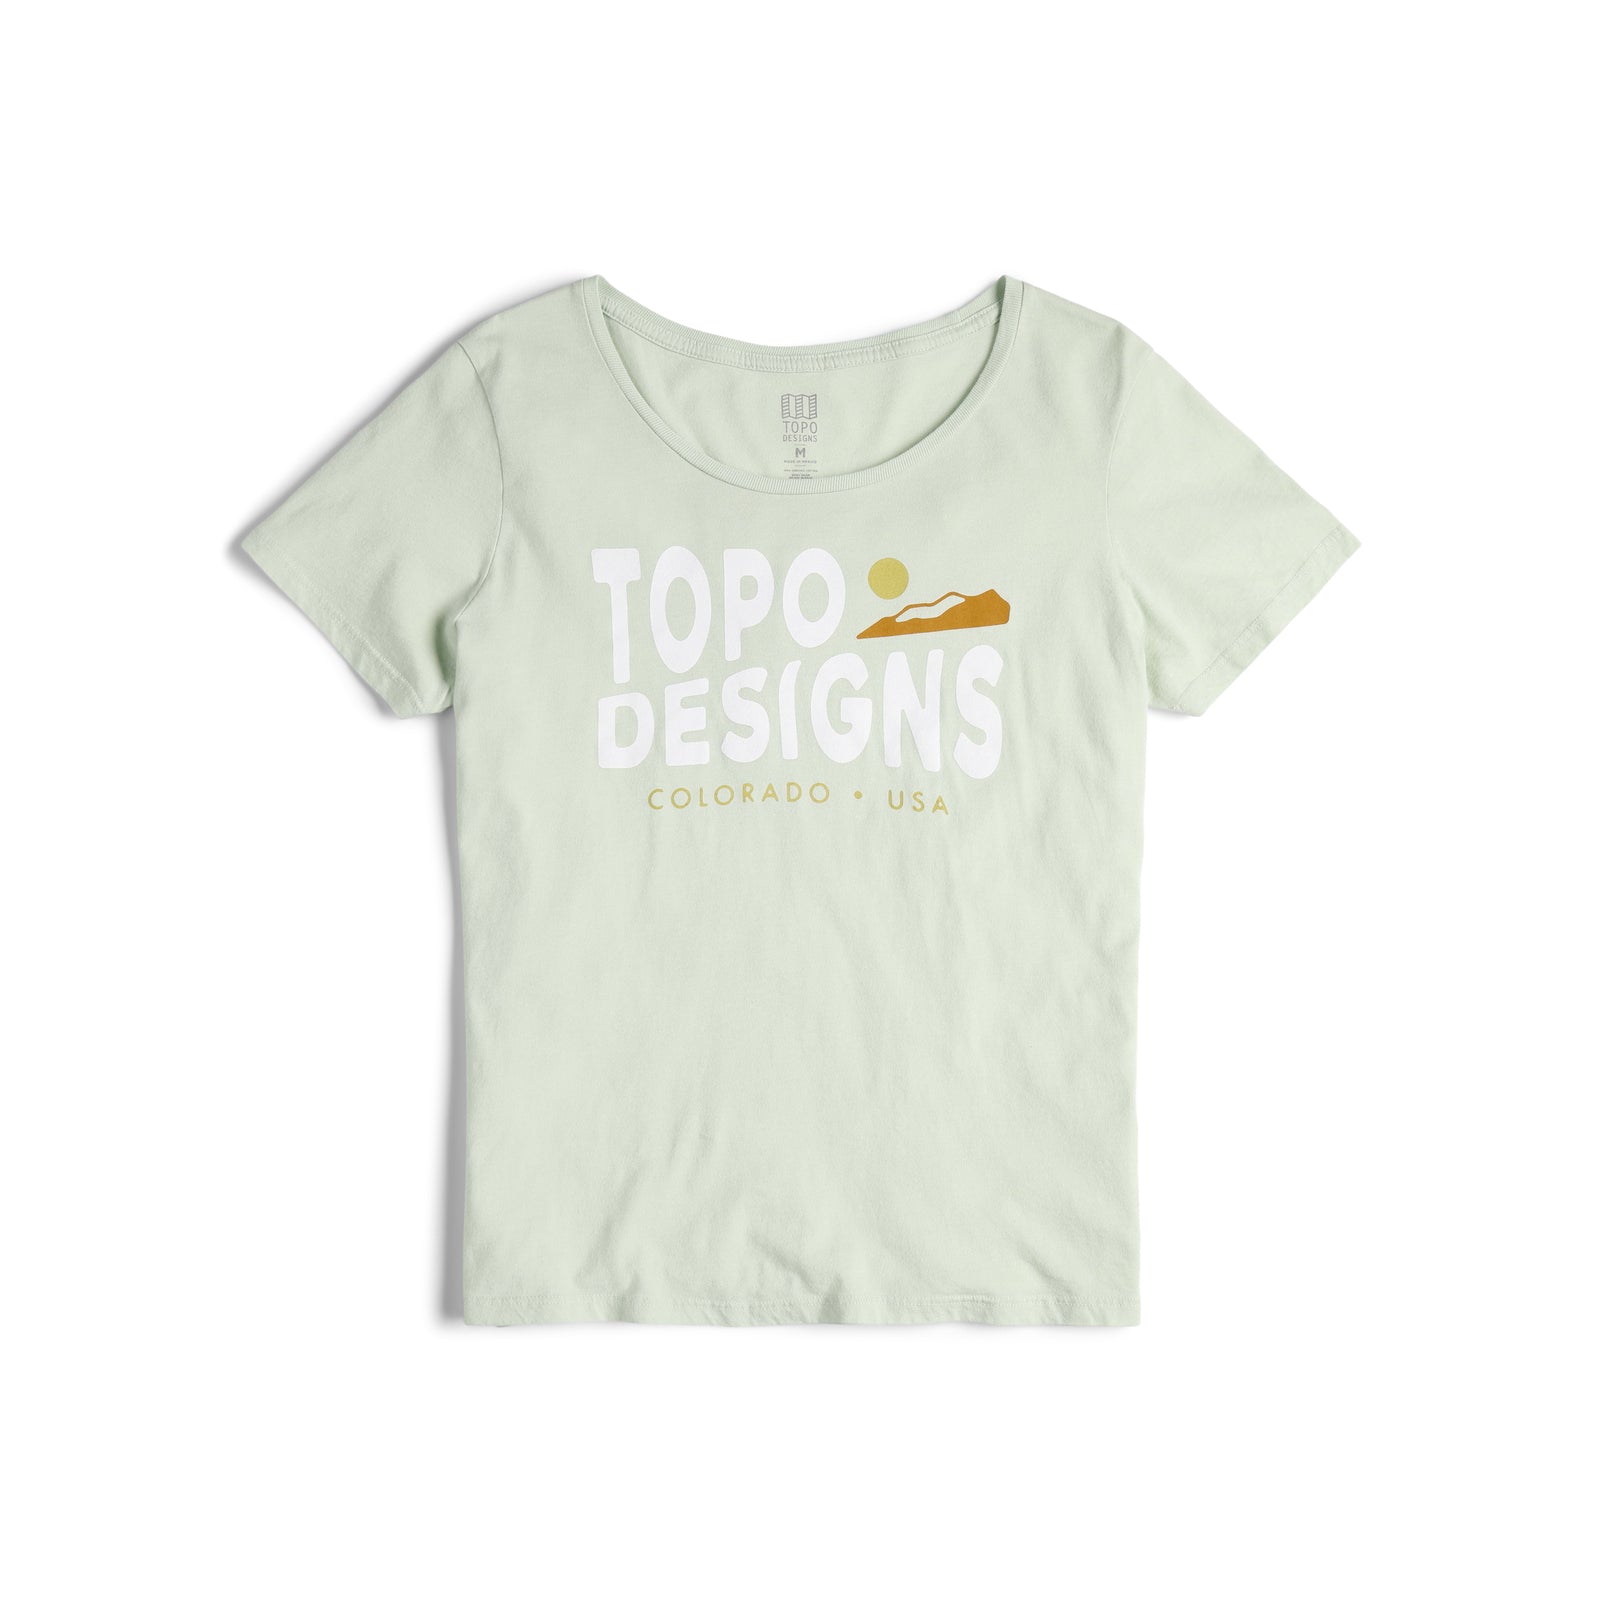 Front view of Topo Designs Women's Sunrise Tee 100% organic cotton short sleeve graphic logo t-shirt in Light Mint" green..